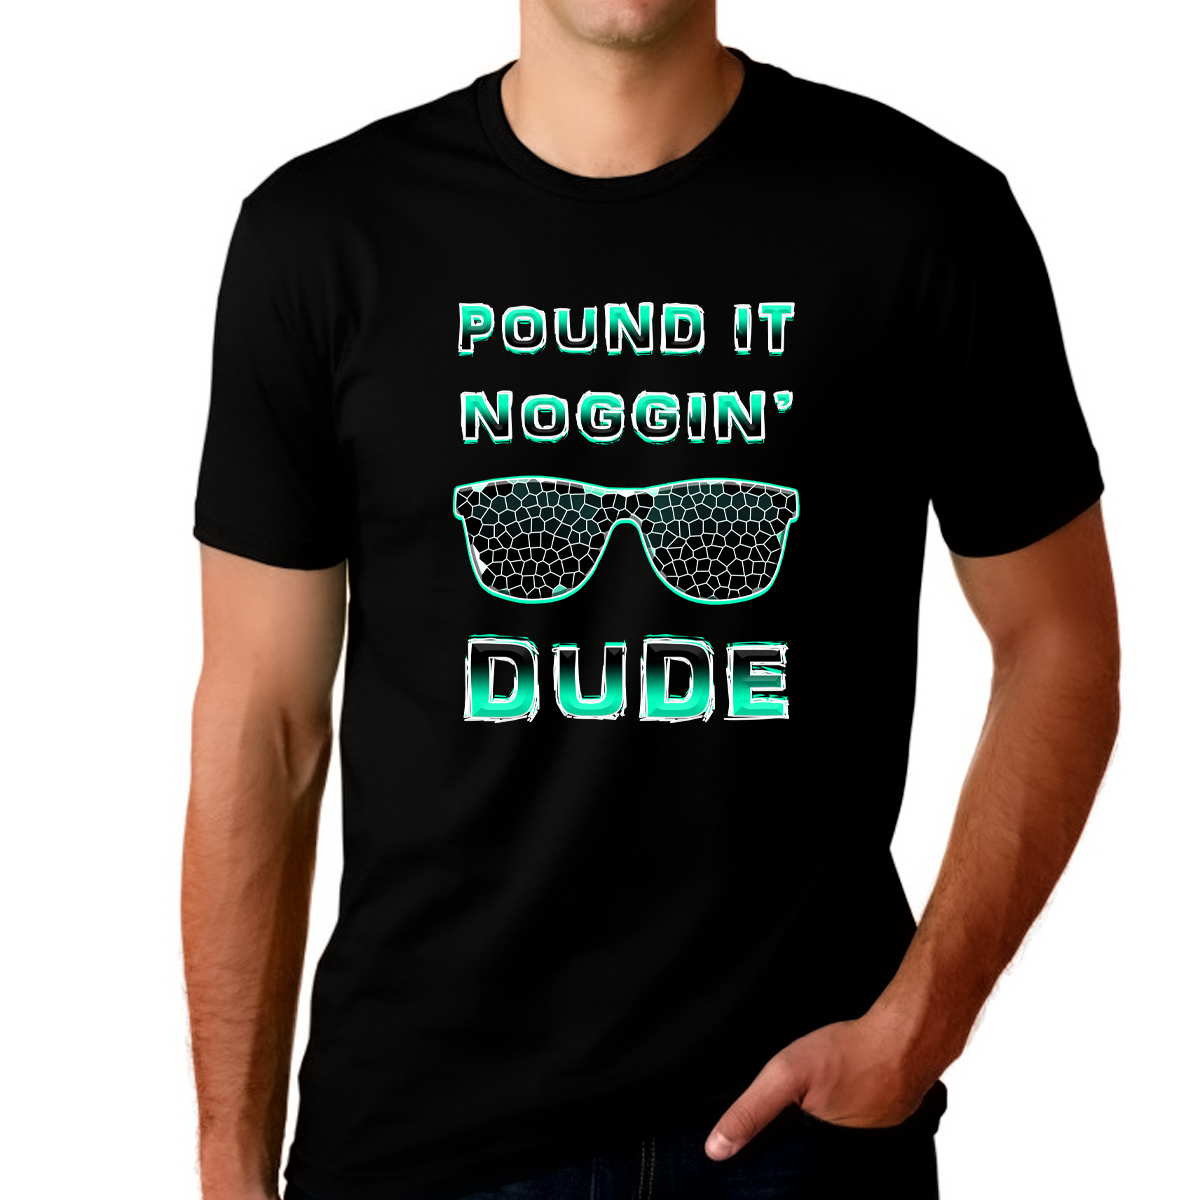 Fire Fit Designs Perfect Dude Shirts for Men - Perfect Dude Shirt - Pound It Noggin Shirt